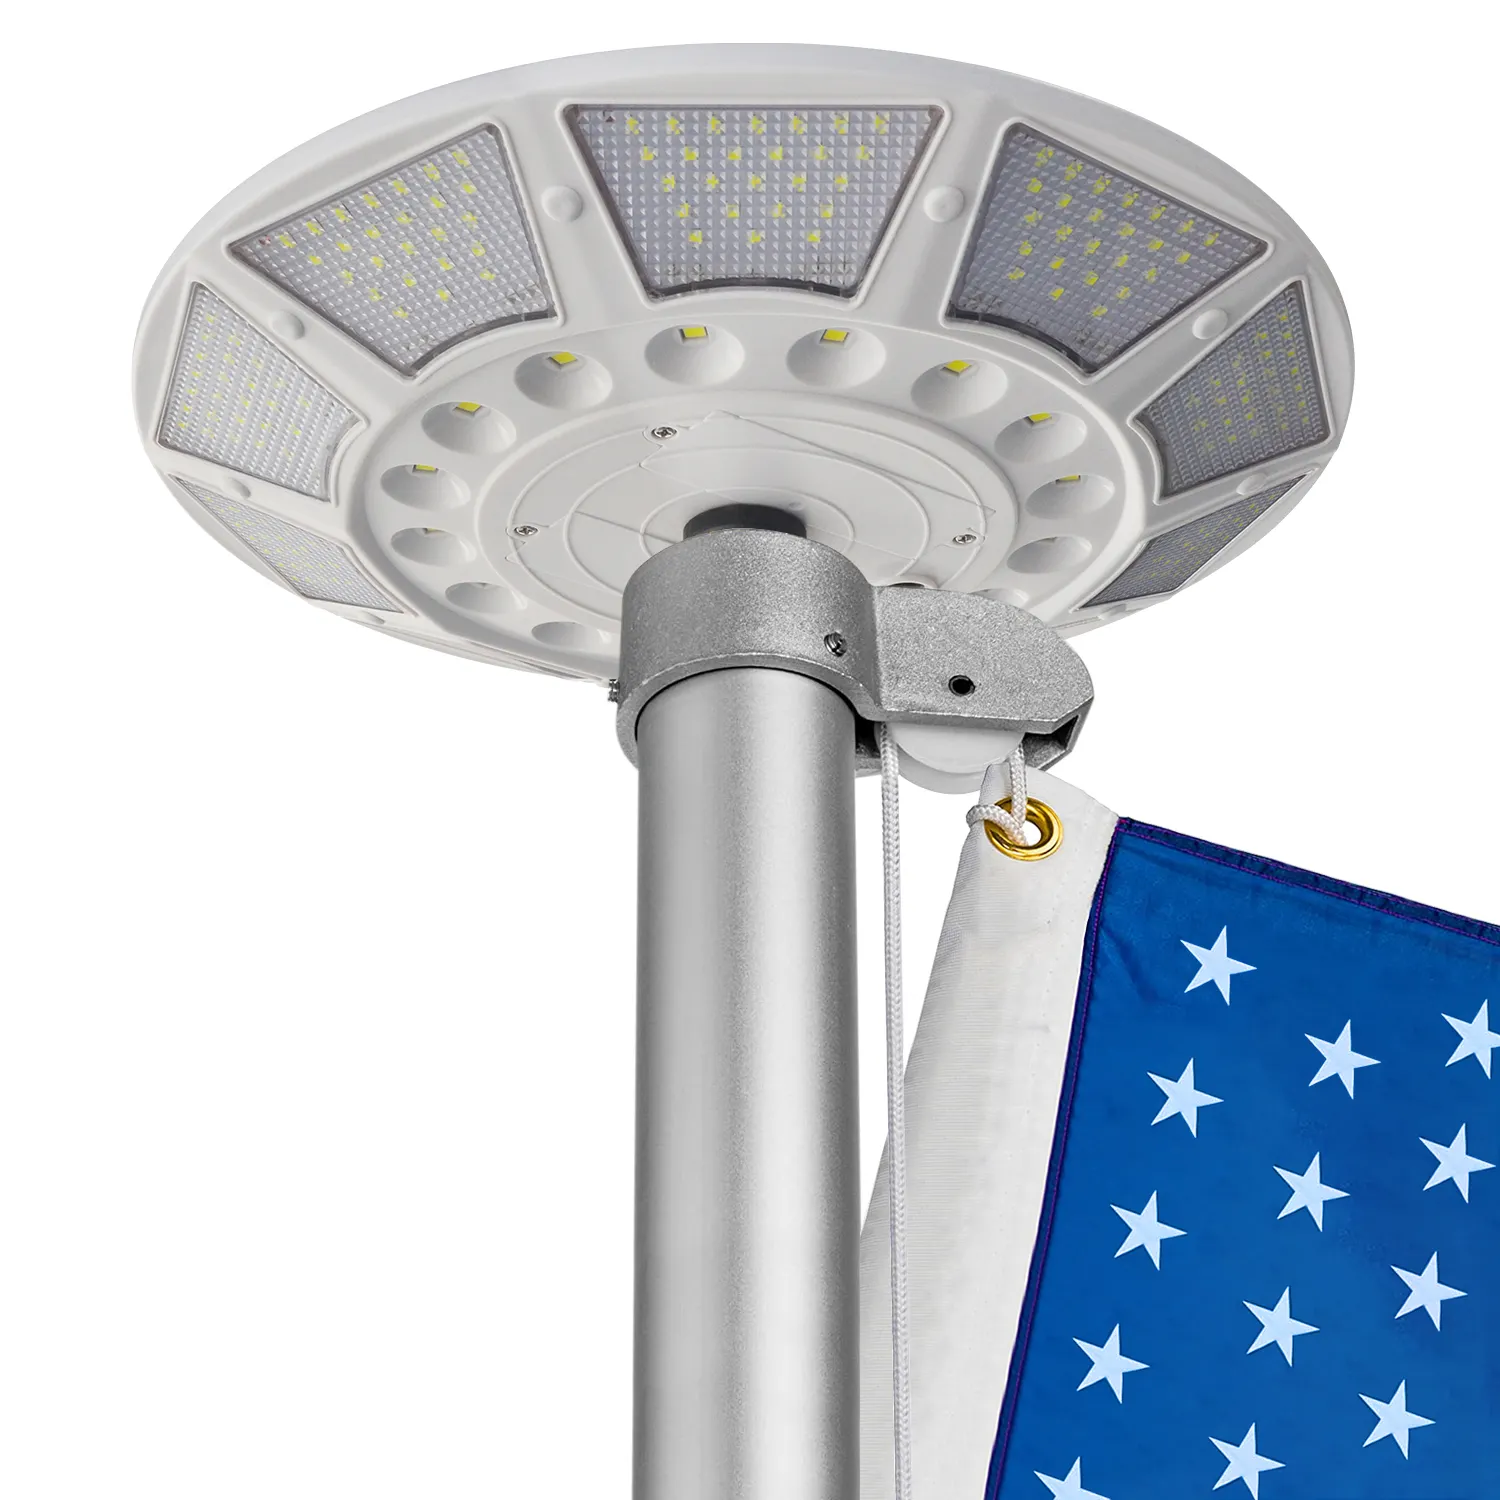 American JY8-899 Solar Flagpole Light UFO Style LED Lamp with Wholesale Price ABS Body IP65 for Garden & Road Use